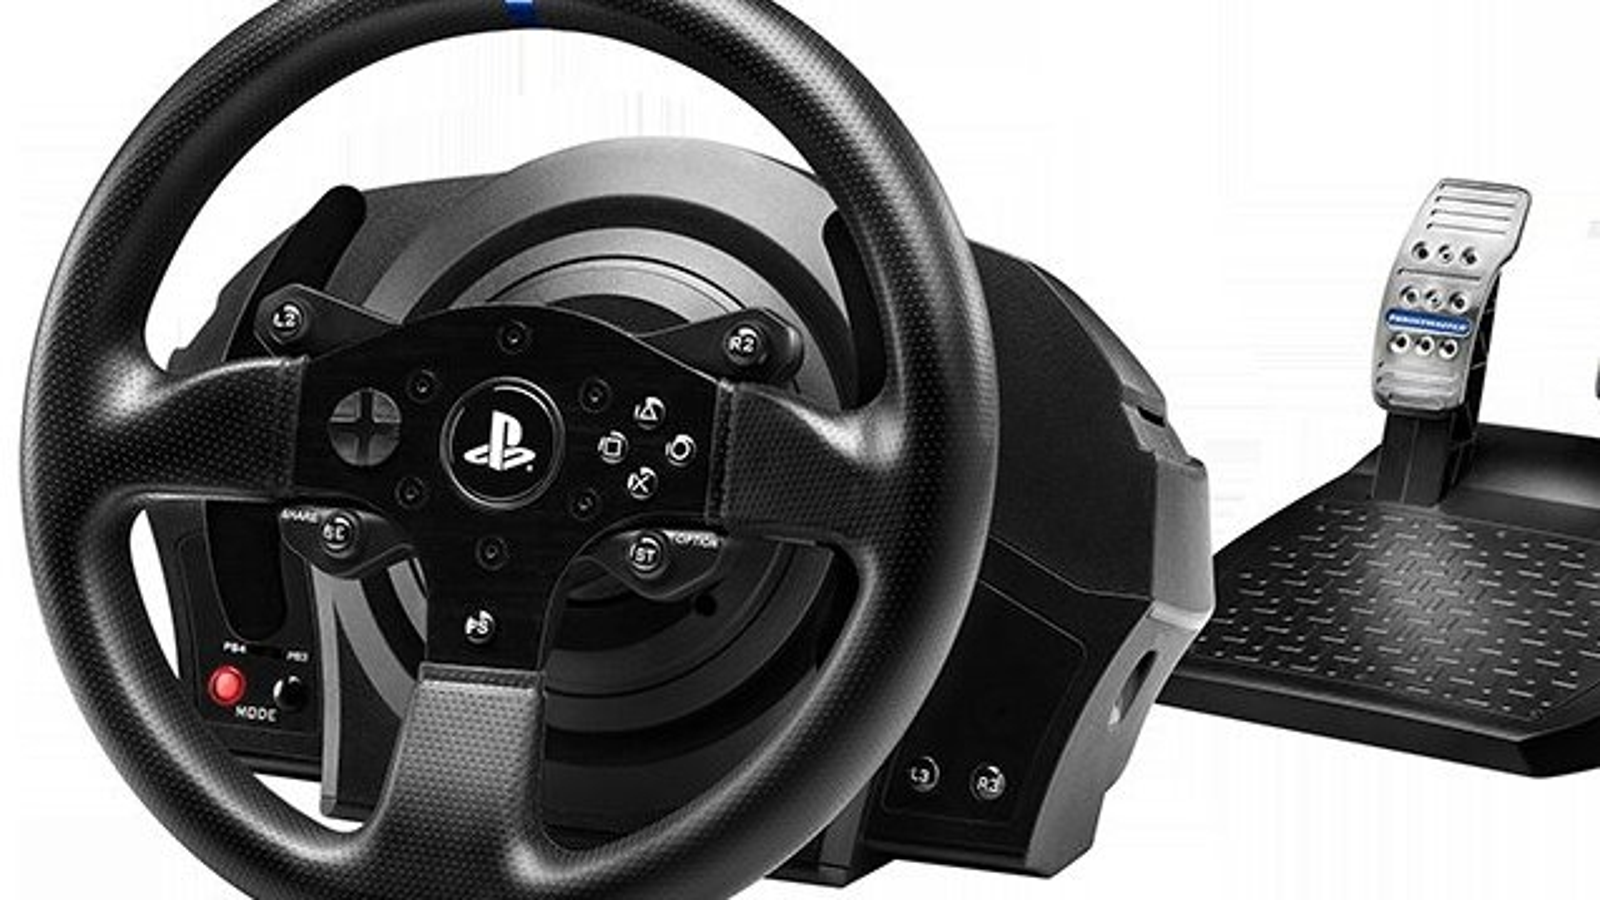 Spanien eksplodere lektie What's the deal with steering wheels for PS4 and Xbox One? | Eurogamer.net